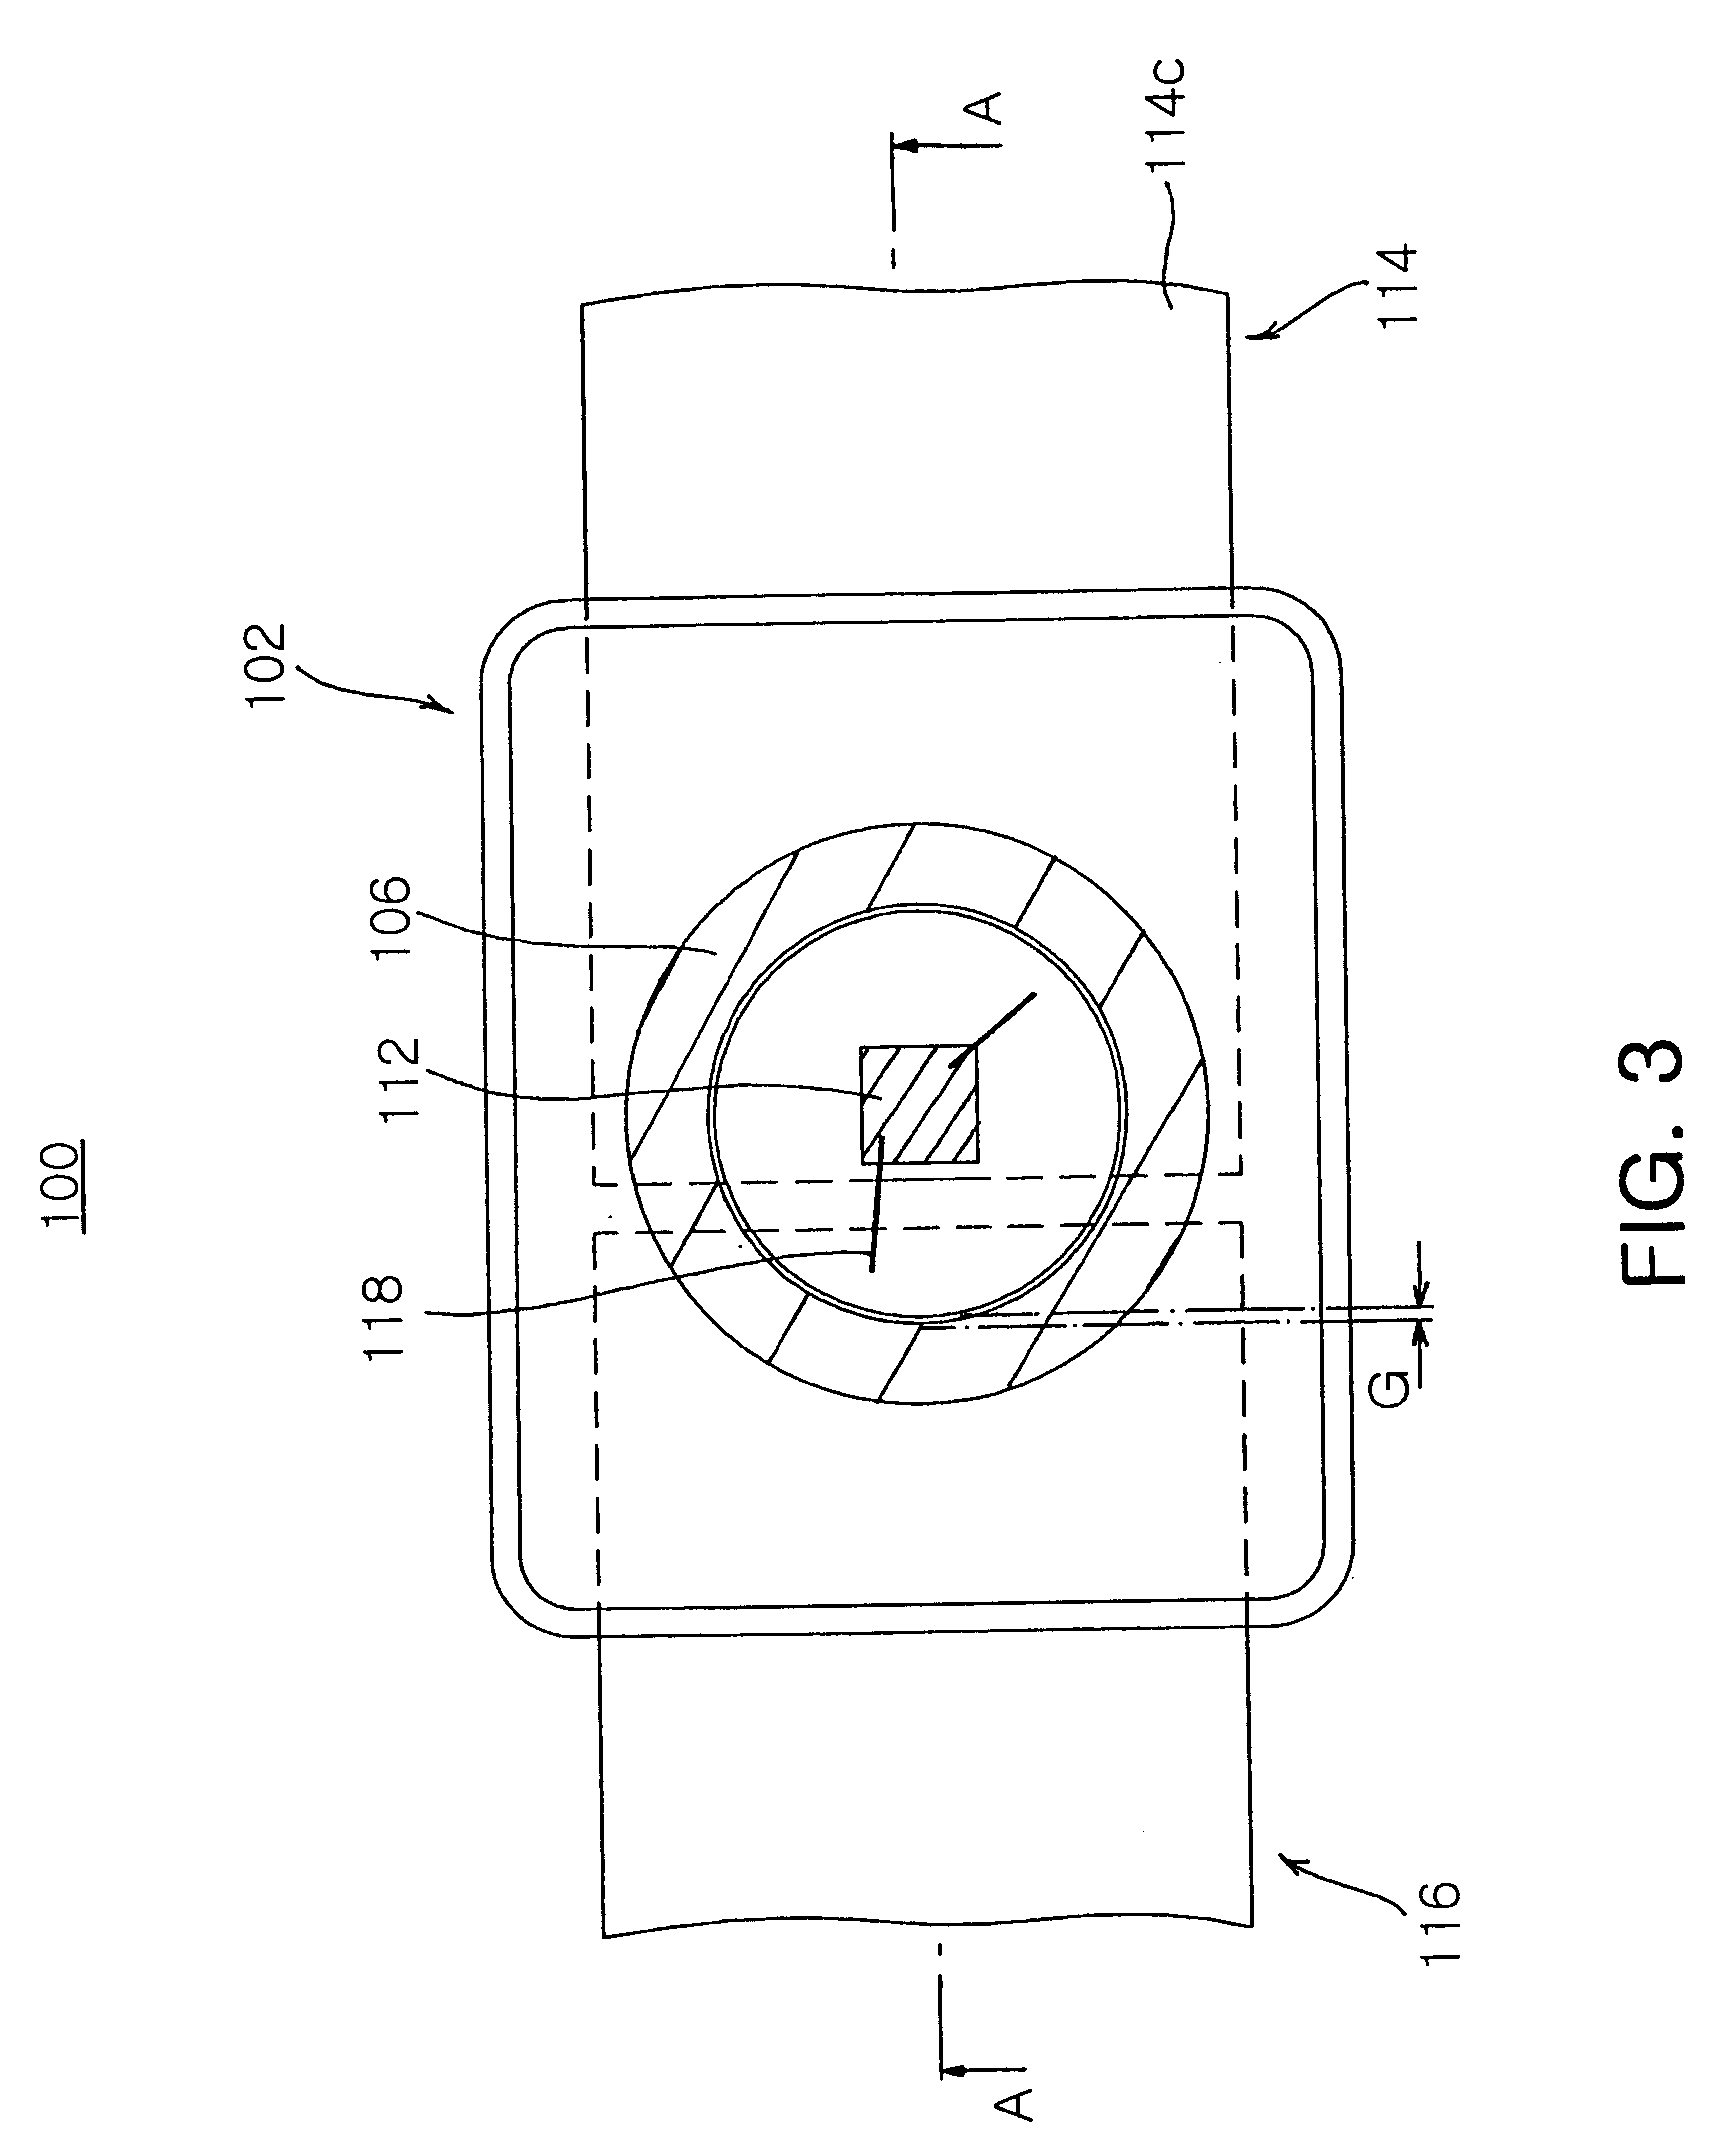 High power light emitting diode package